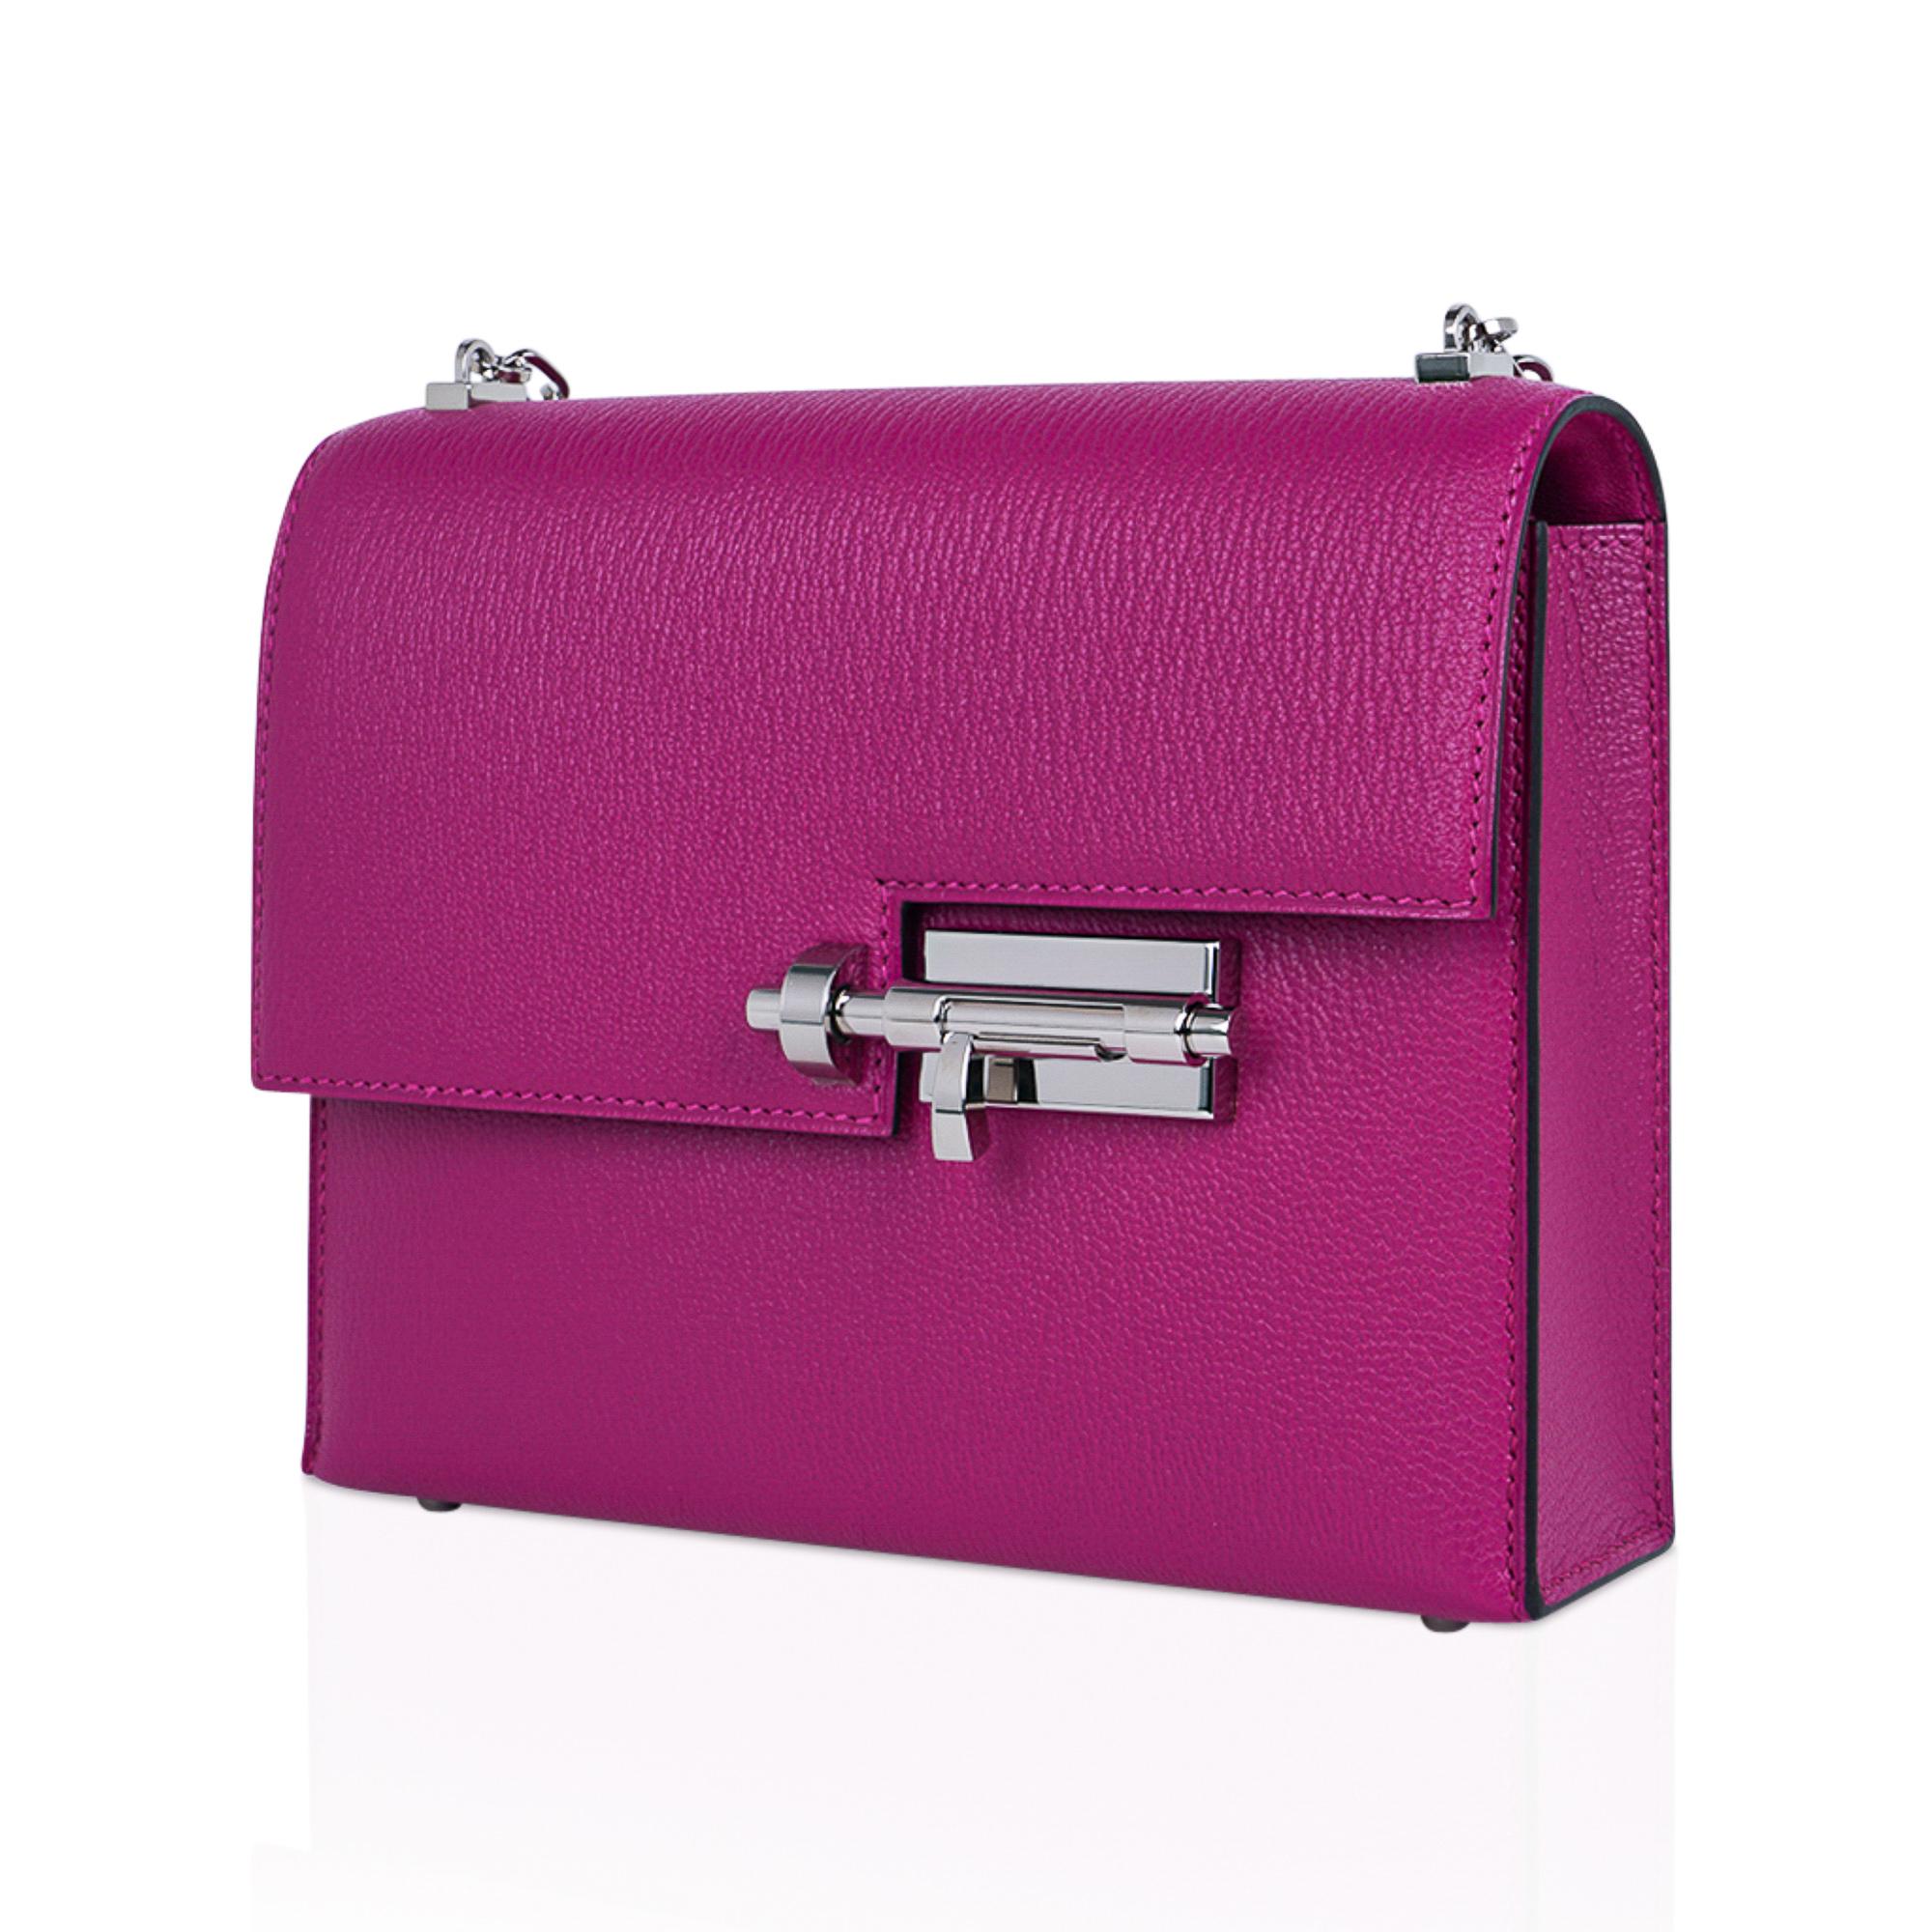 Mightychic offers an Hermes Mini Verrou Chaine bag featured in saturated rich Rose Pourpre.
Palladium link strap with the stylized deadbolt closure.
Leather interior with two patch pockets.
Coveted Chevre leather.
Signature stamp under the